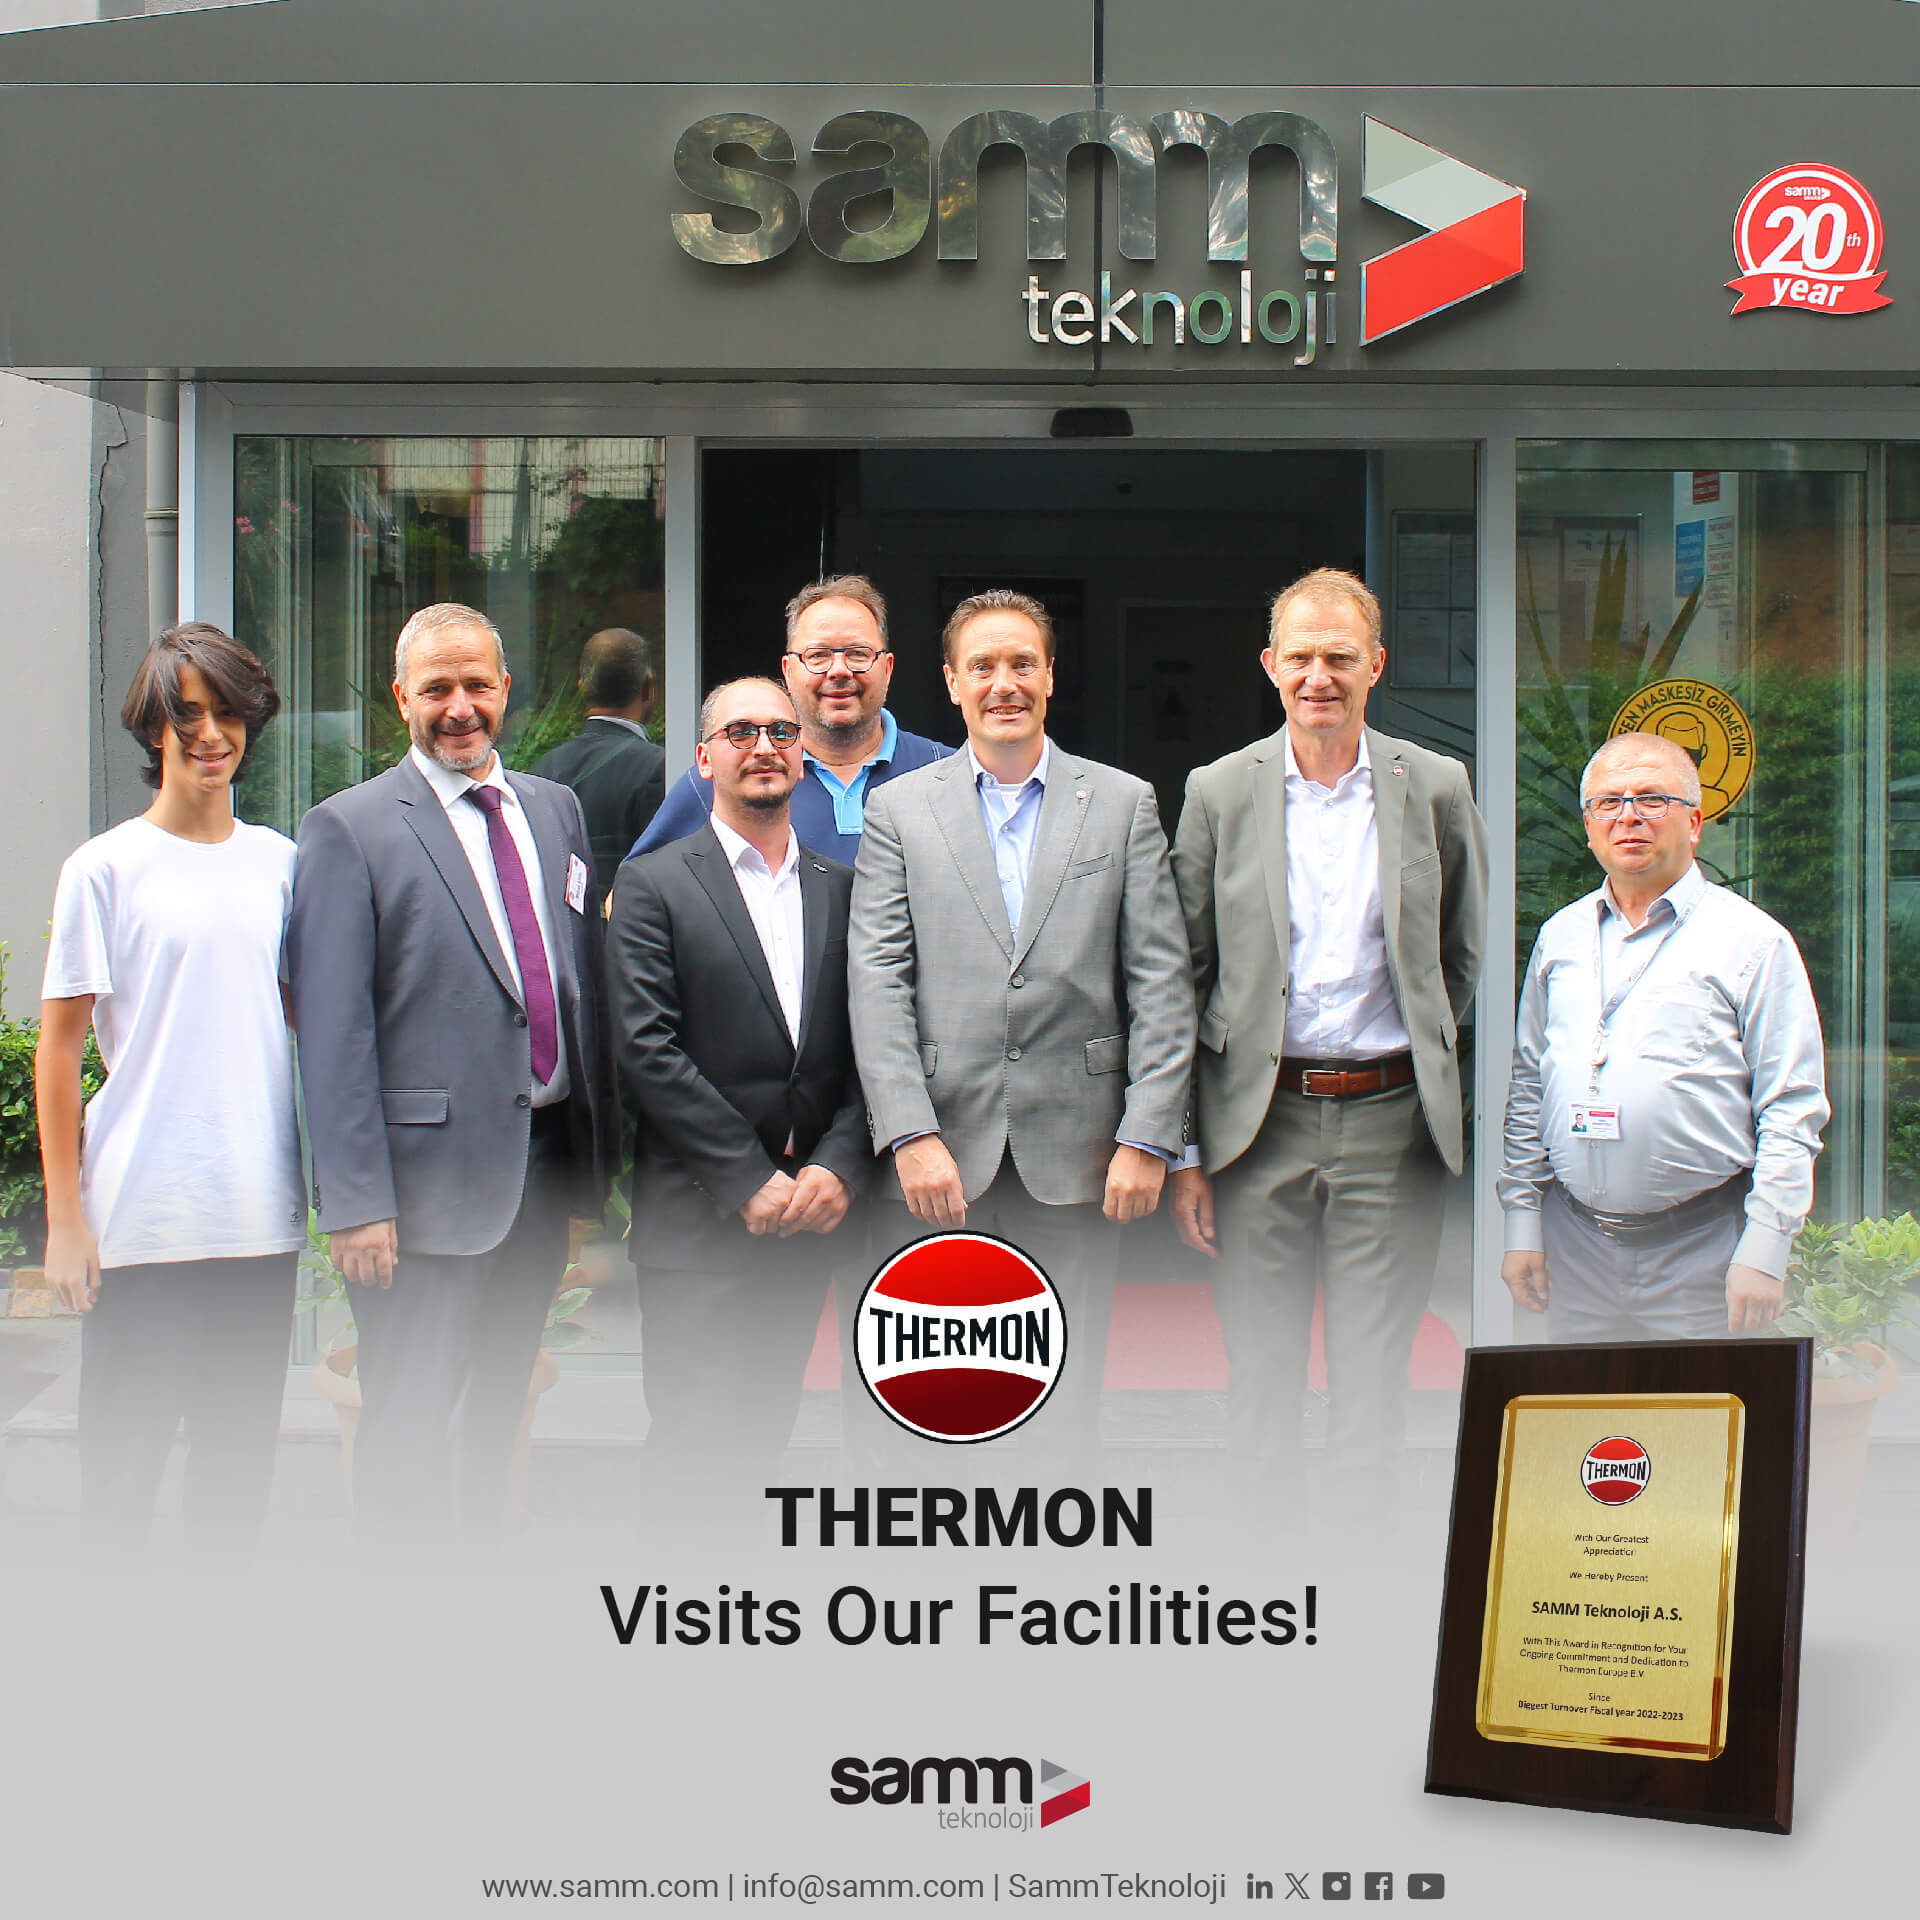 Thermon Visits Samm Teknoloji and Presents an Award for Best Performance - Mr. Michel Salsmans, Thermon Europe B.V.'s EMEA Sales Channels Leader, and Mr. International Manager Director